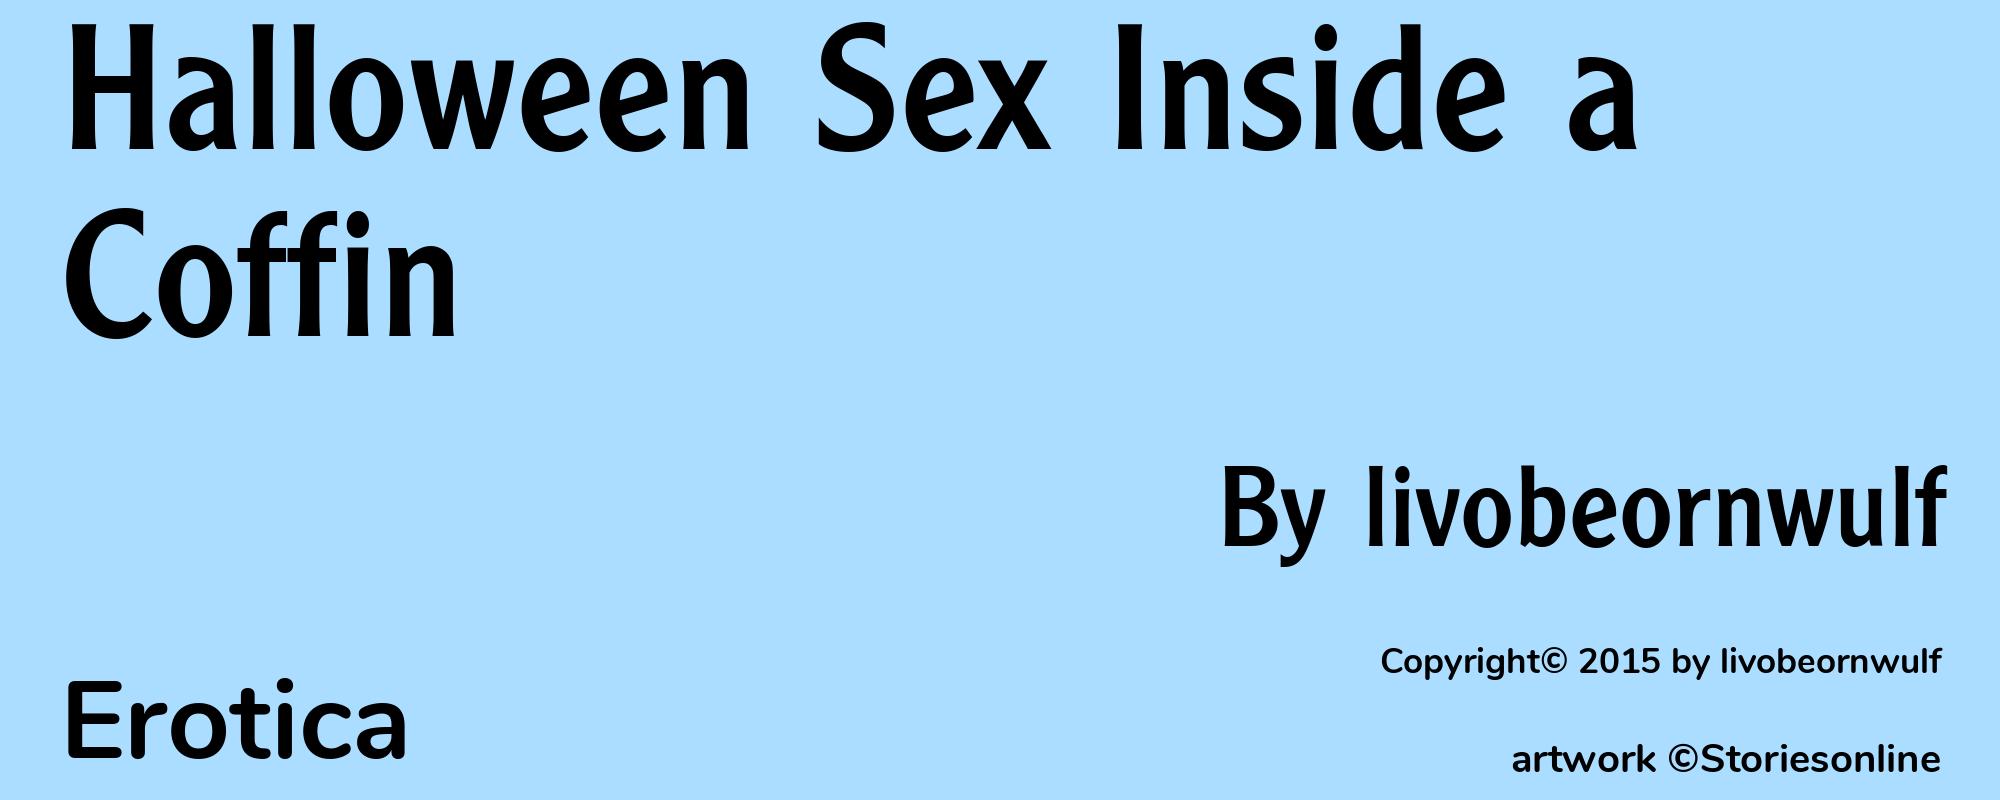 Halloween Sex Inside a Coffin - Cover